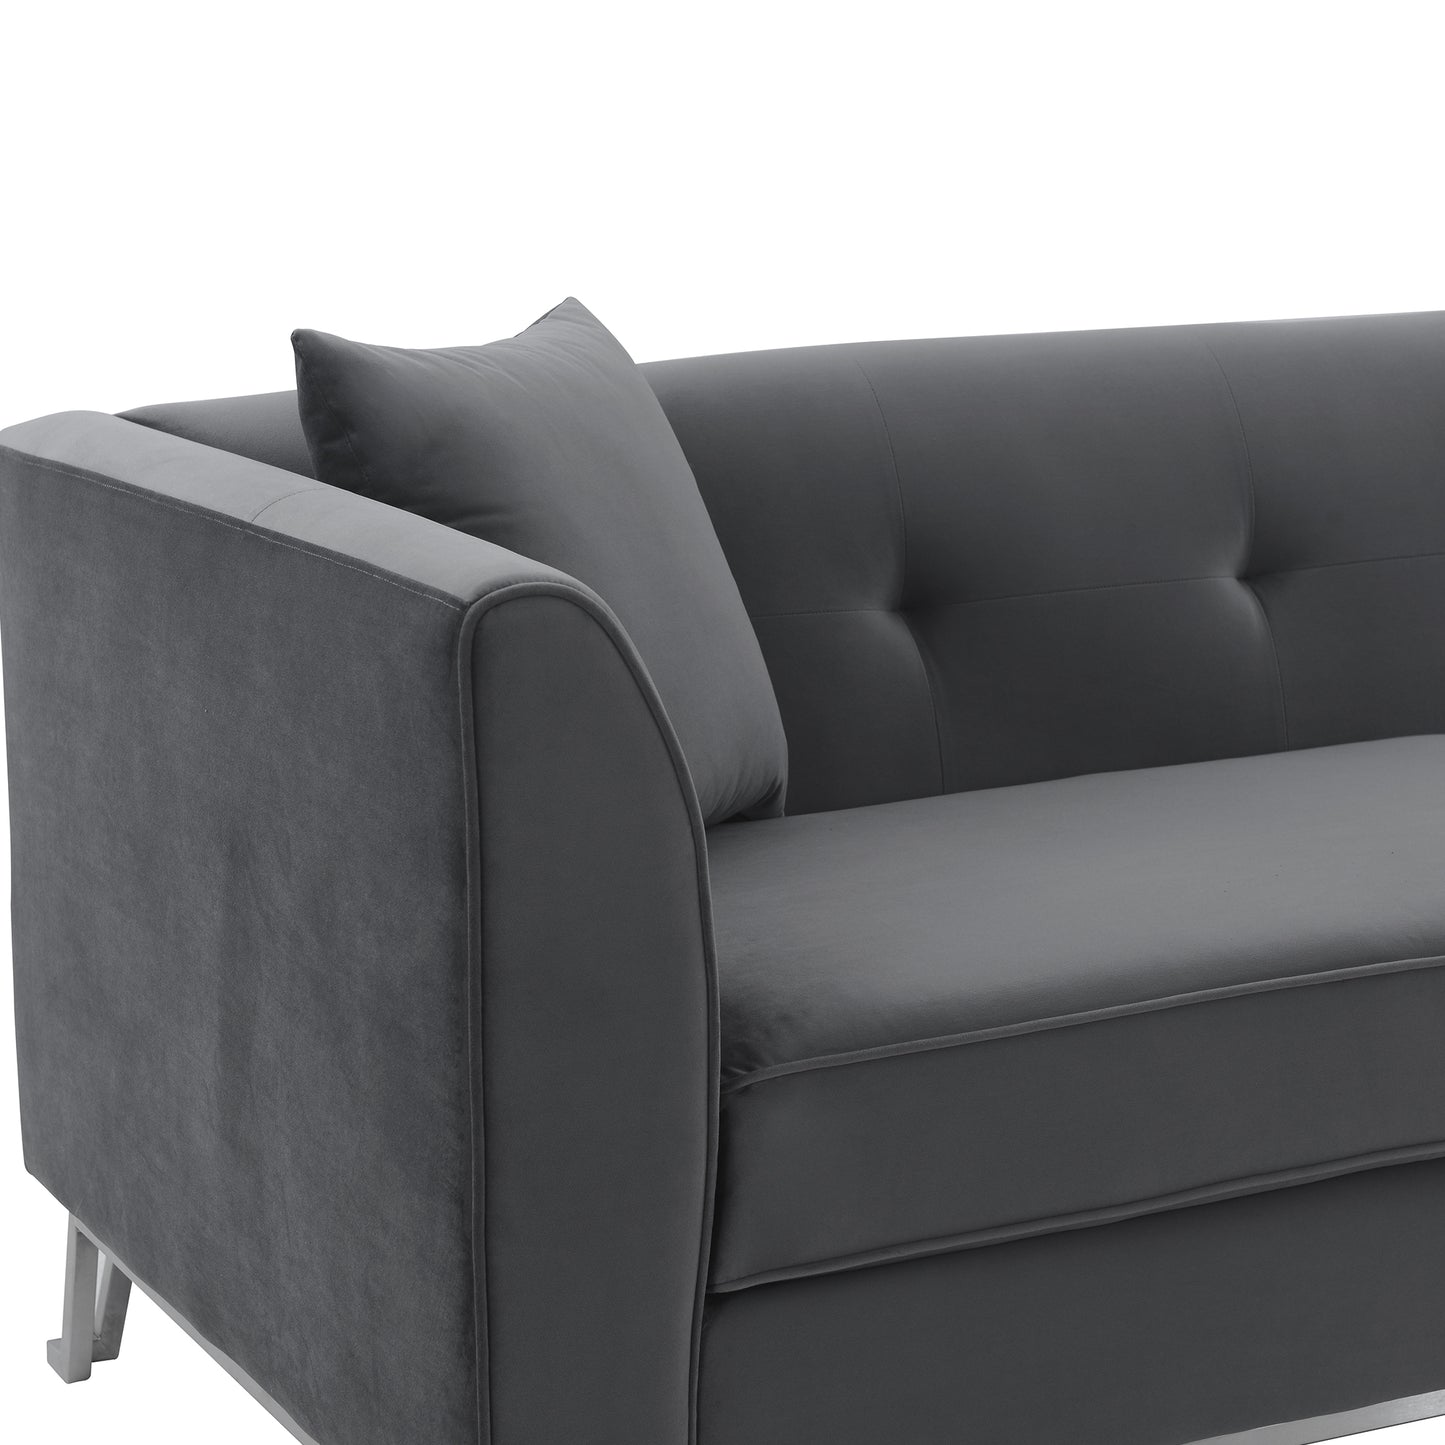 Everest 90" Gray Fabric Upholstered Sofa with Brushed Stainless Steel Legs